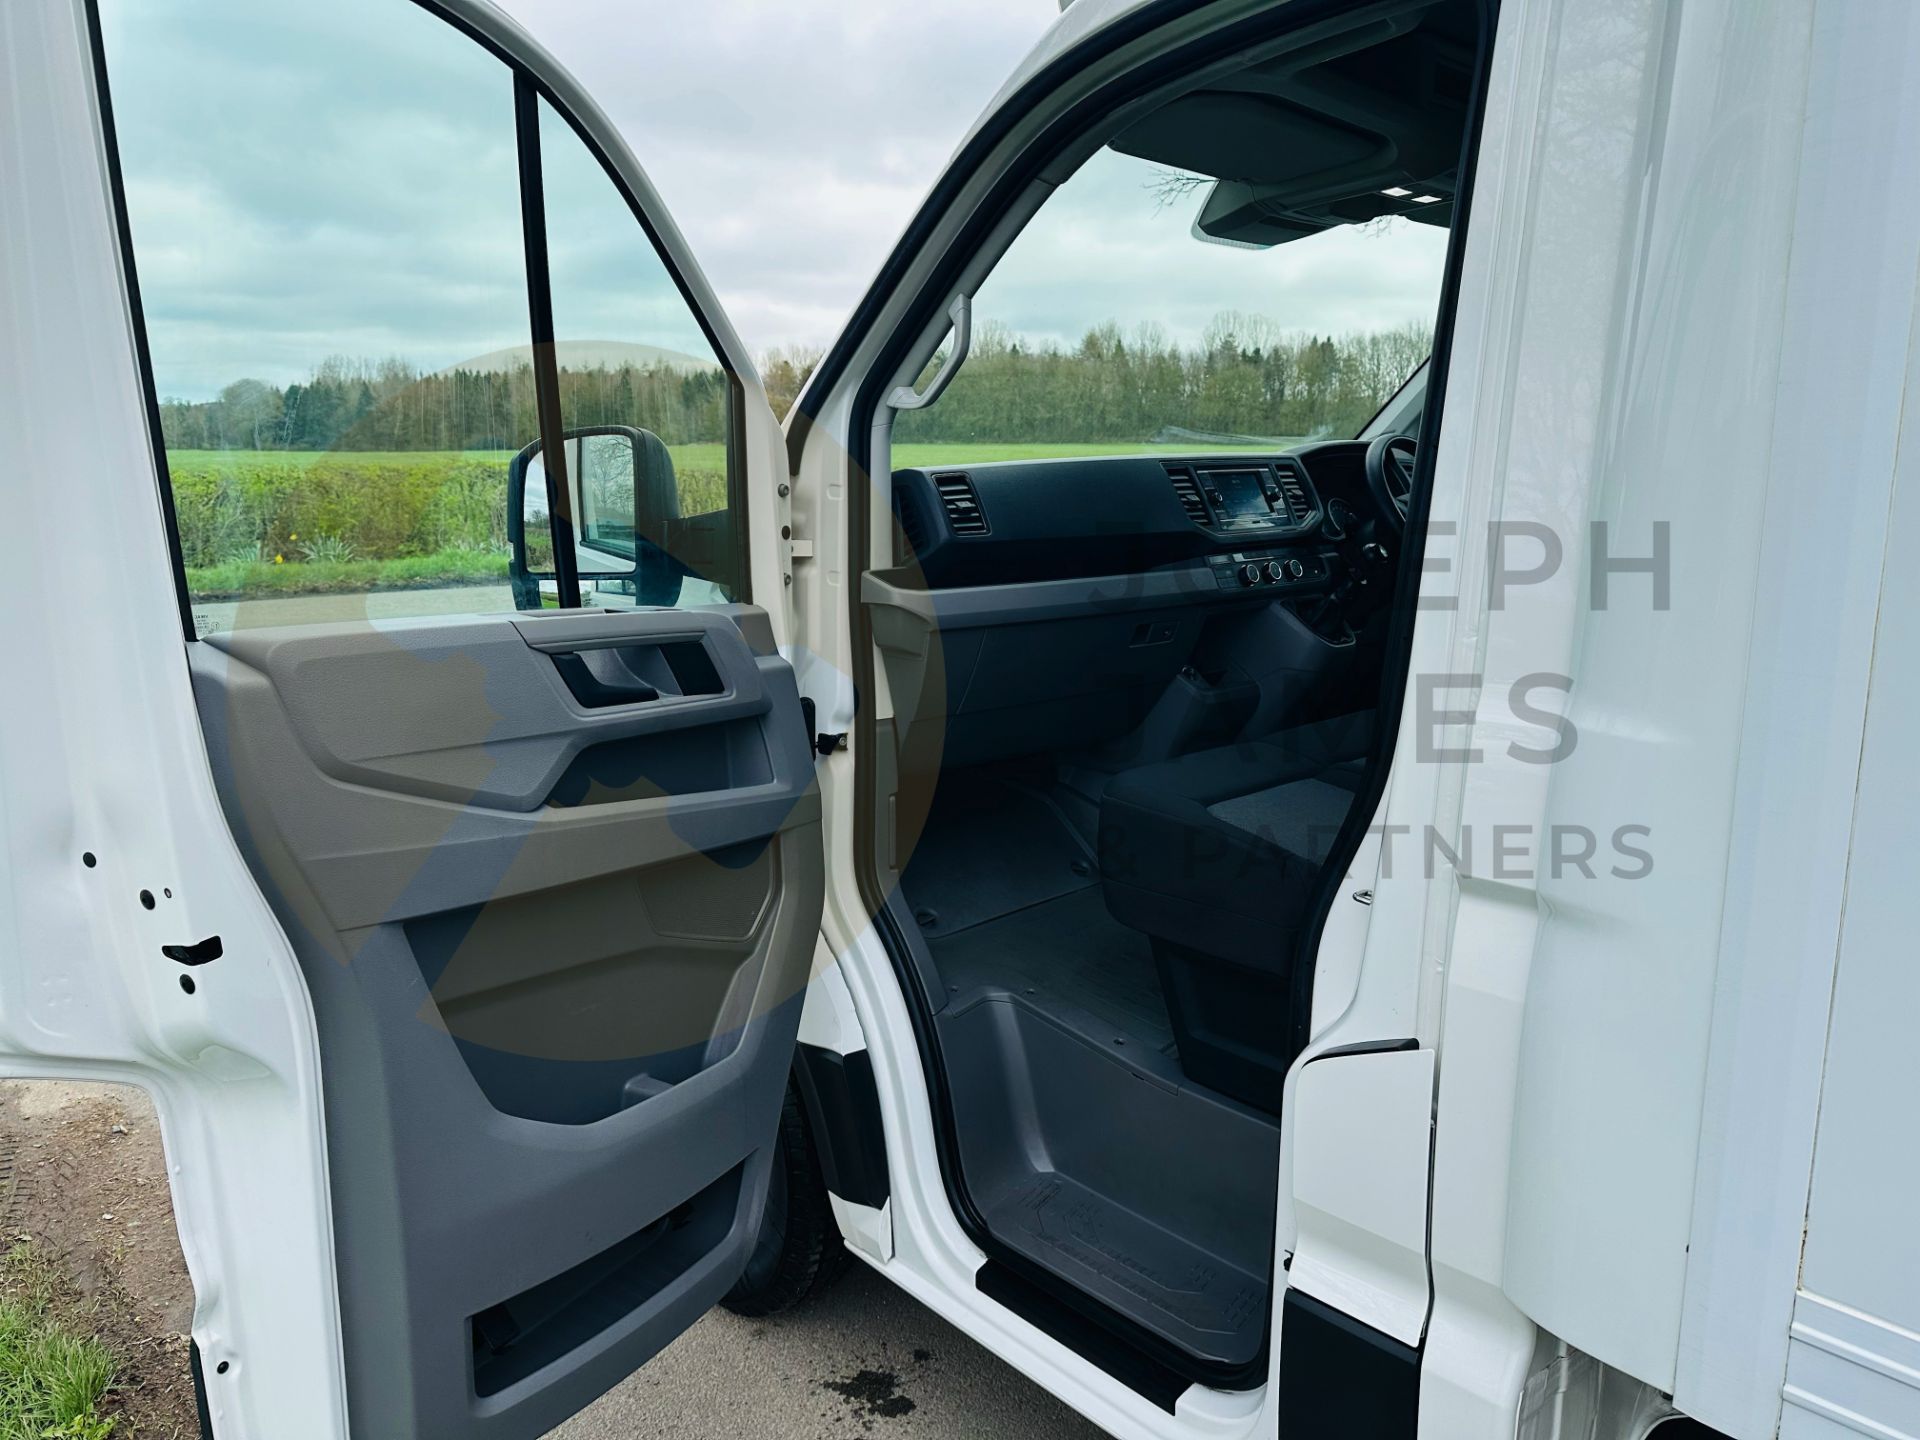 VOLKSWAGEN CRAFTER 2.0 TDI (140) LWB LUTON WITH TAIL LIFT (2021 MODEL) 1 OWNER - LOW MILES - AIR CON - Image 13 of 27